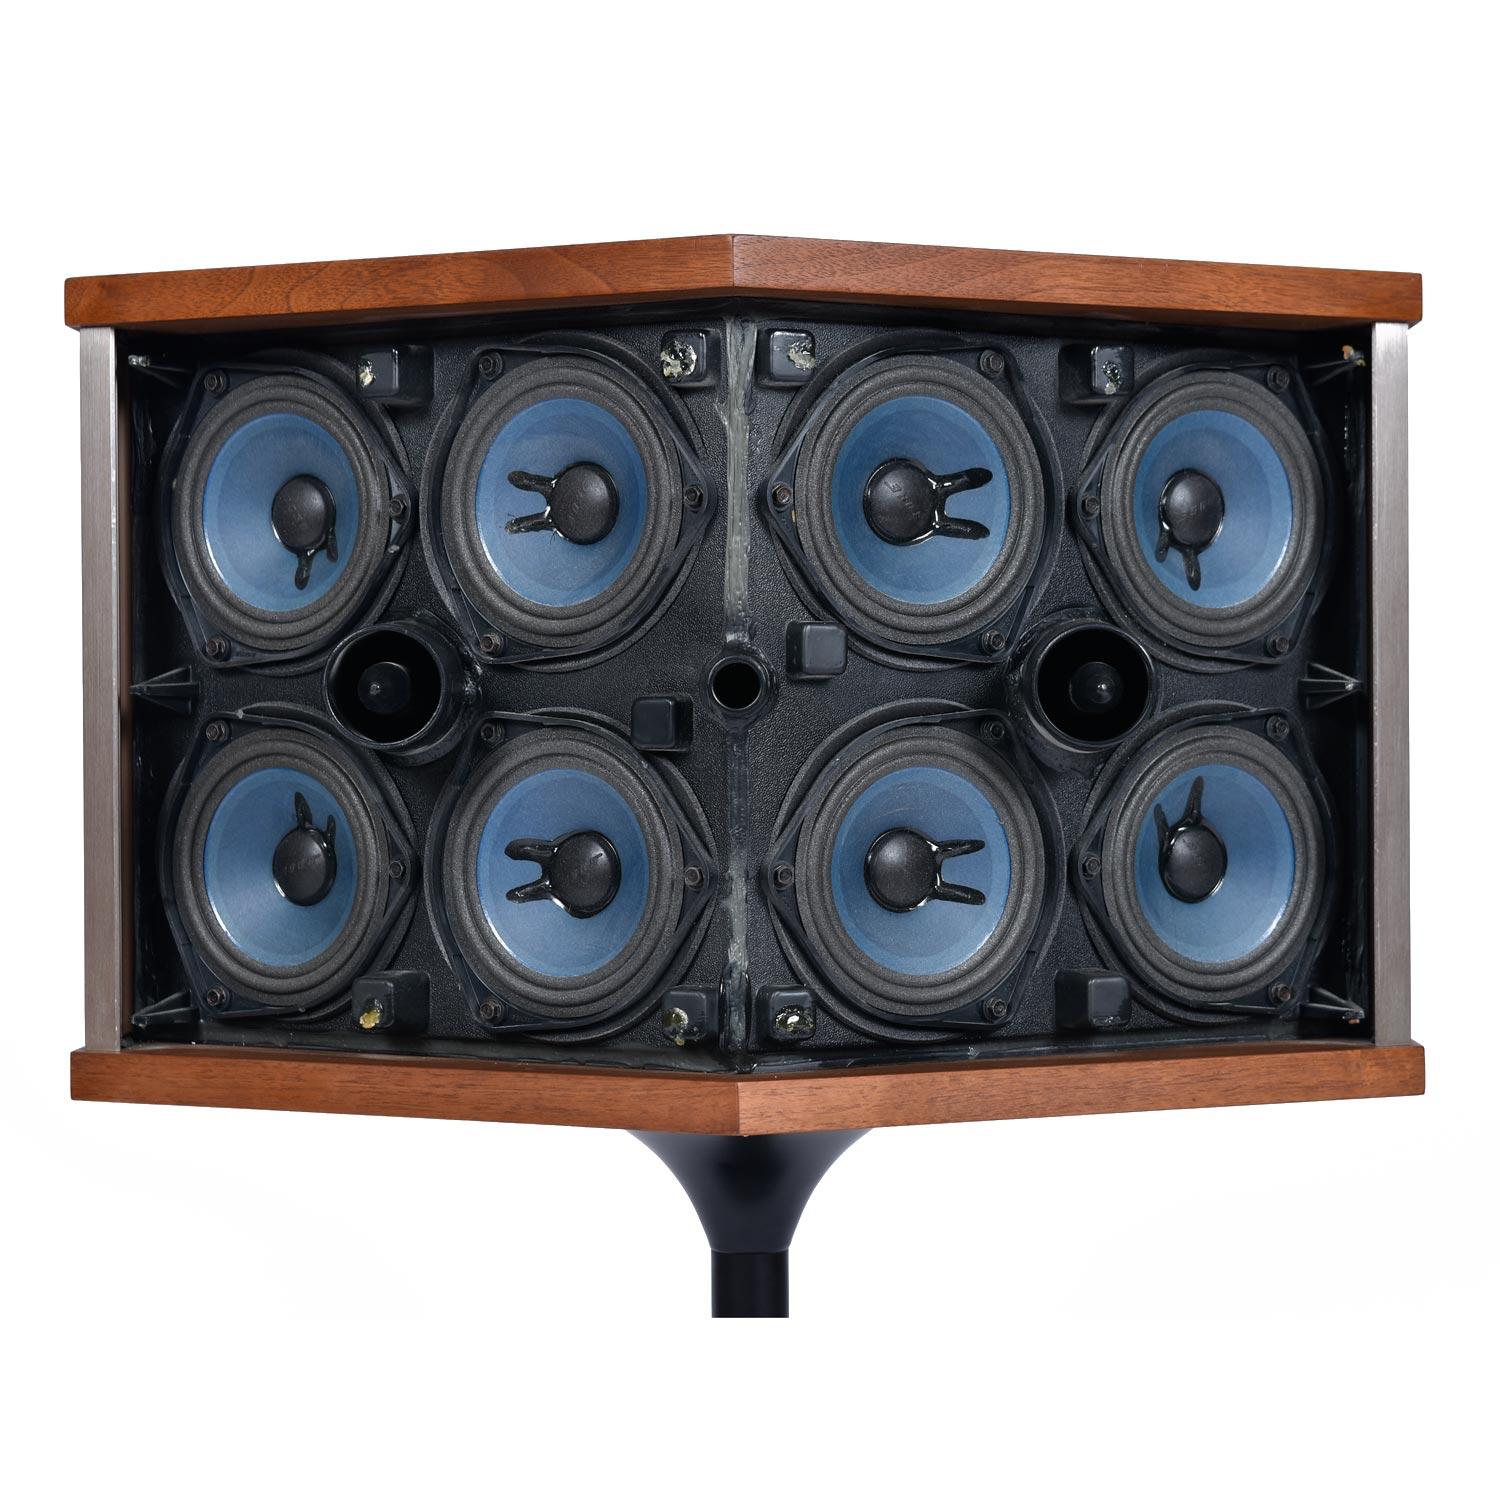 Metal Restored Vintage 1983 Bose 901 Series V Speakers with Tulip Stands and Equalizer